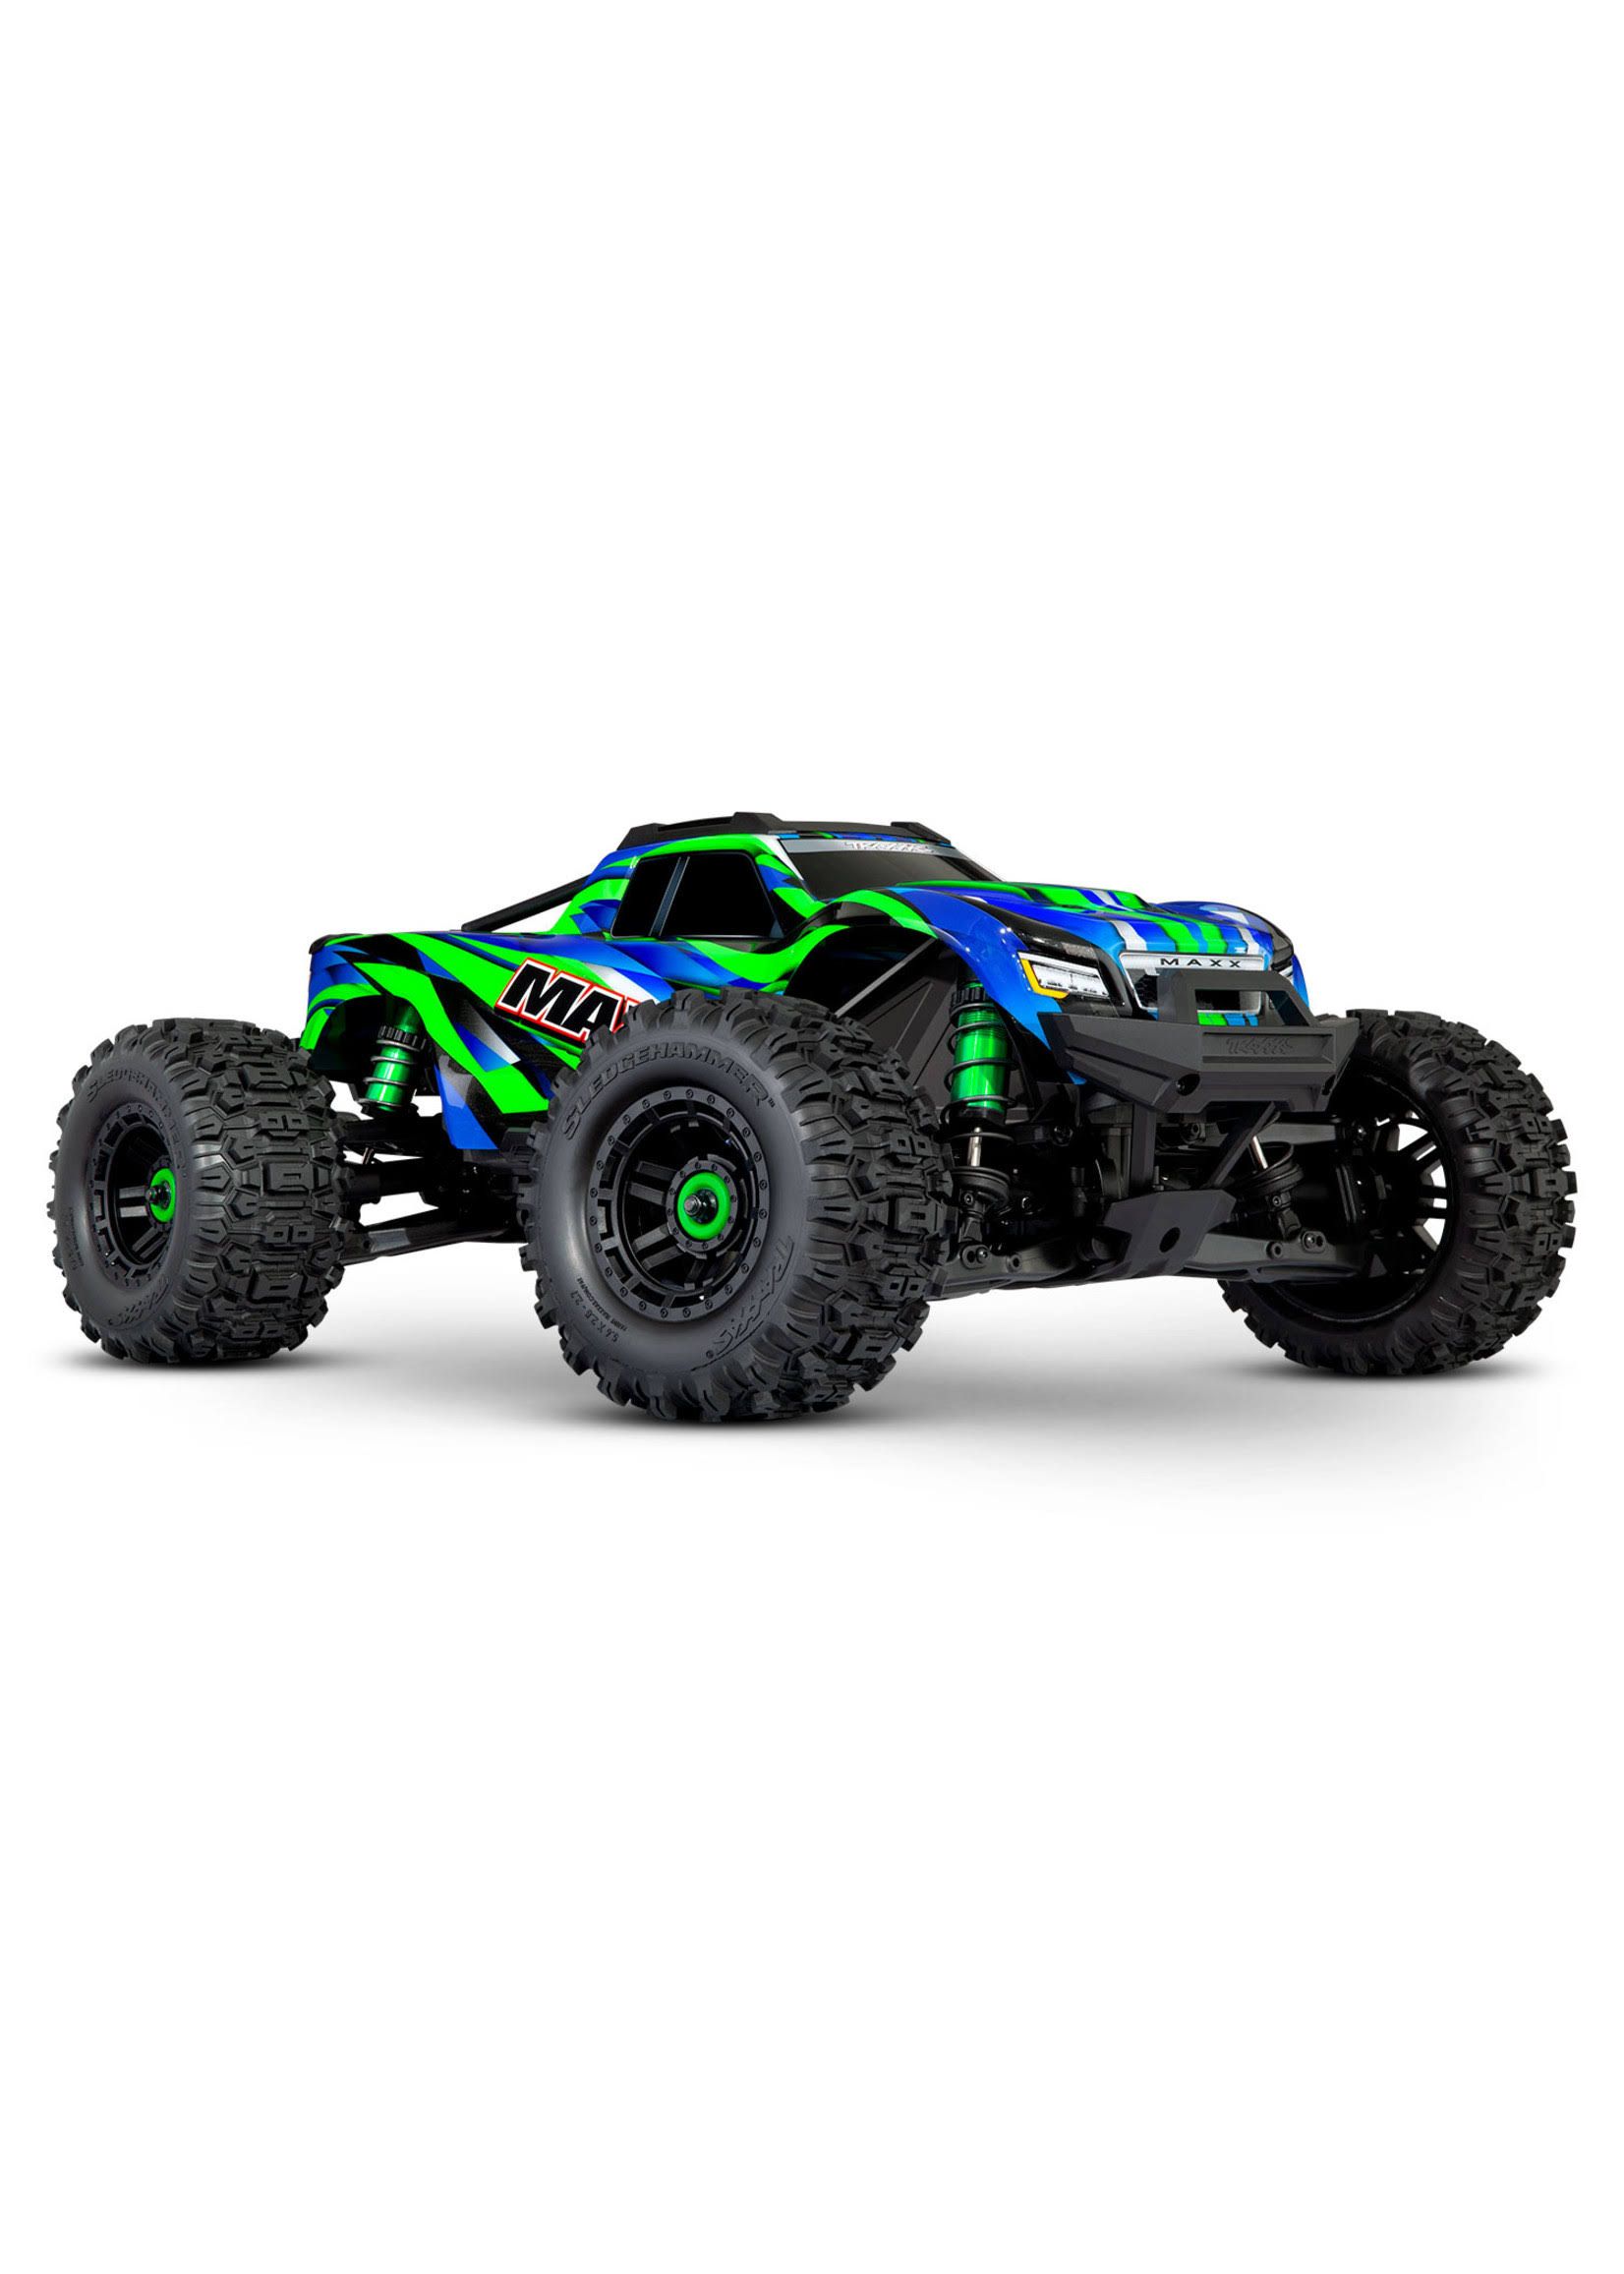 Traxxas 89086-4 Maxx V2 with WideMaxx 1/10 Electric RC Monster Truck Green